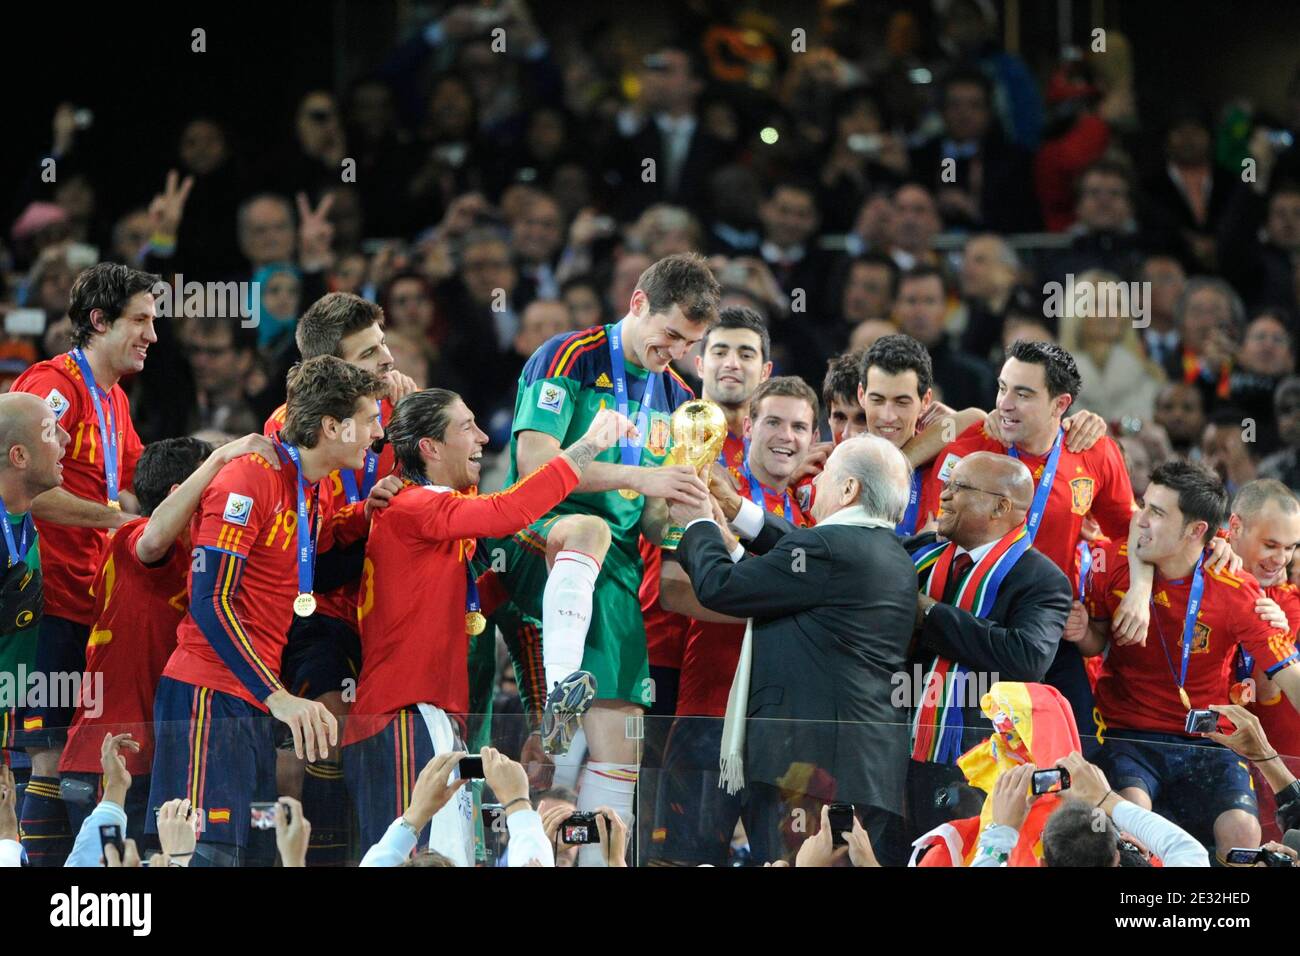 Spanish players celebrate with the trophy following the 2010 FIFA World Cup South Africa Final Soccer match, Spain vs Netherlands at Soccer City football stadium in Johannesburg, South Africa on July 11th, 2010. Spain won 1-0. Photo by Henri Szwarc/ABACAPRESS.COM Stock Photo